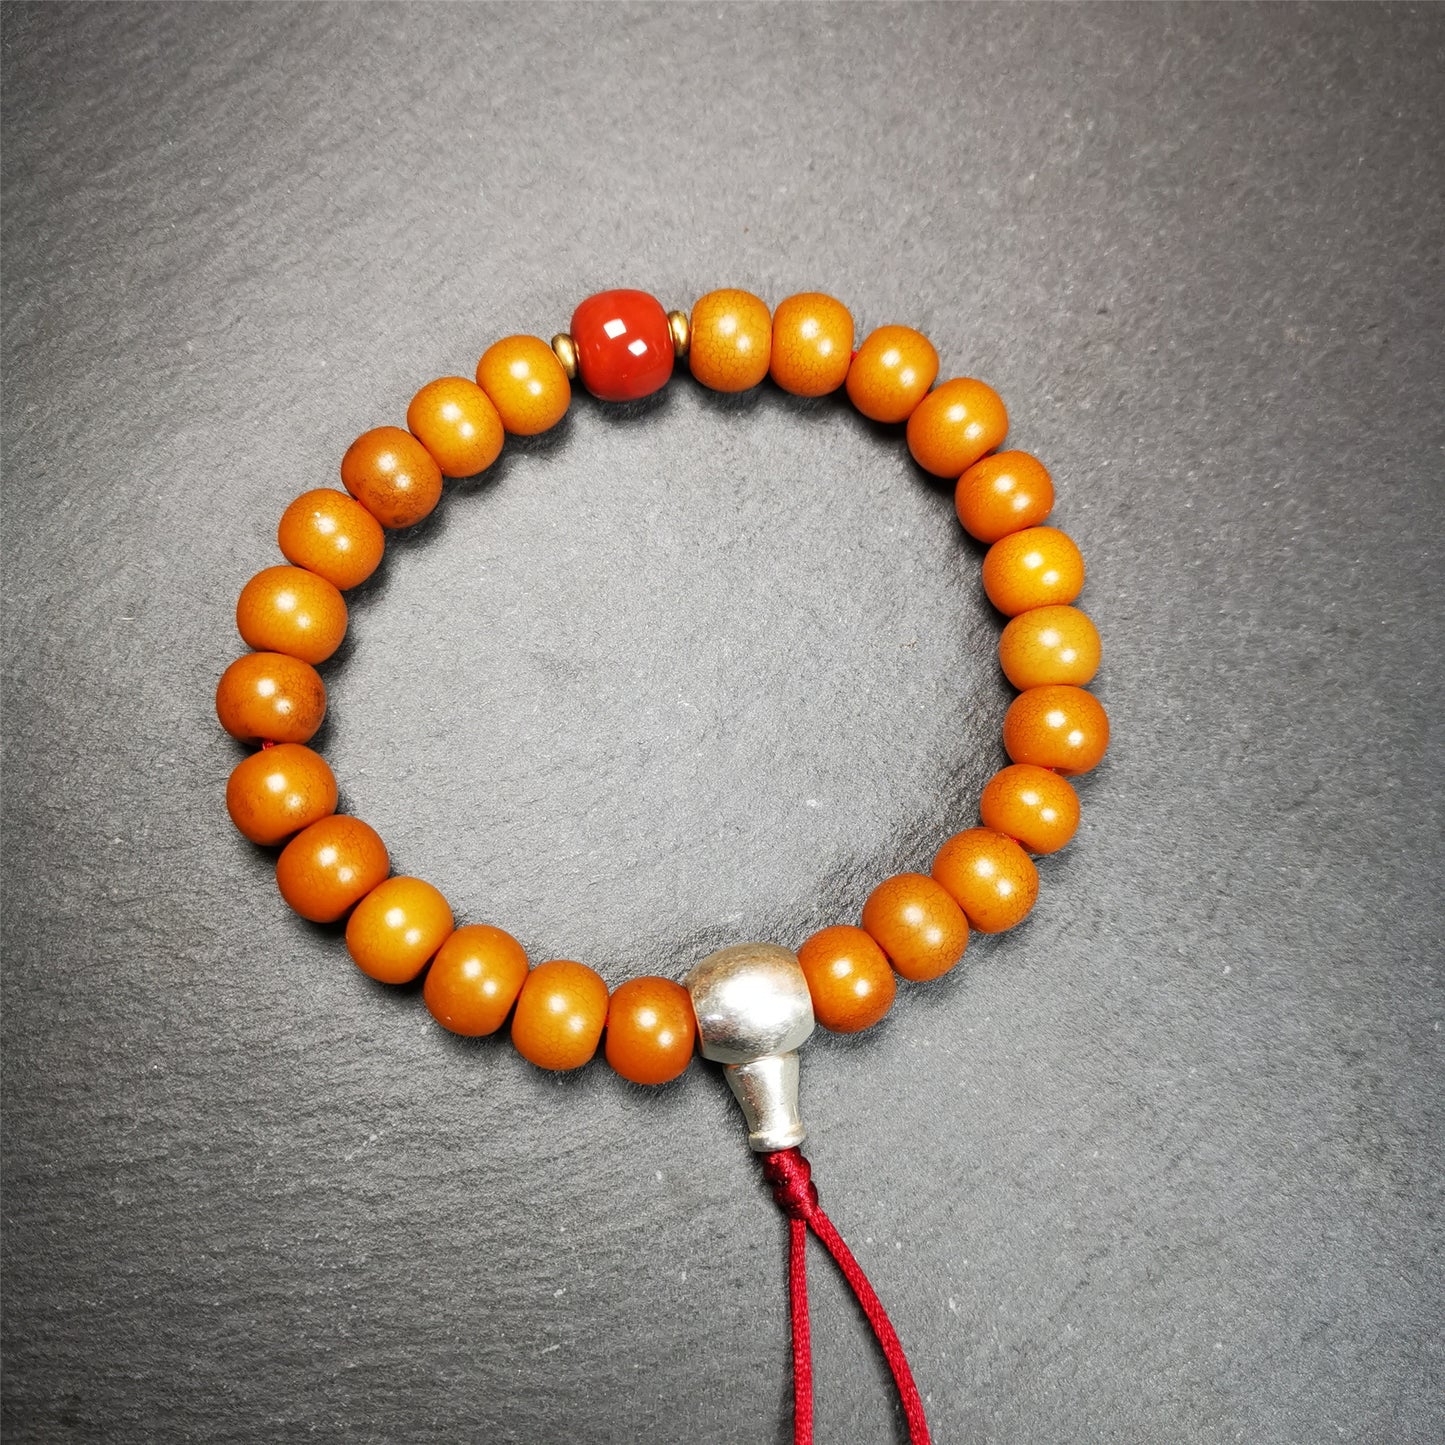 This mala was made by Tibetan craftsmen.  It is made of Corypha Linn Seeds, diameter of 10mm / 0.4",circumference is 22cm / 8.7" ,with agate spacer bead, end of a white copper guru bead.